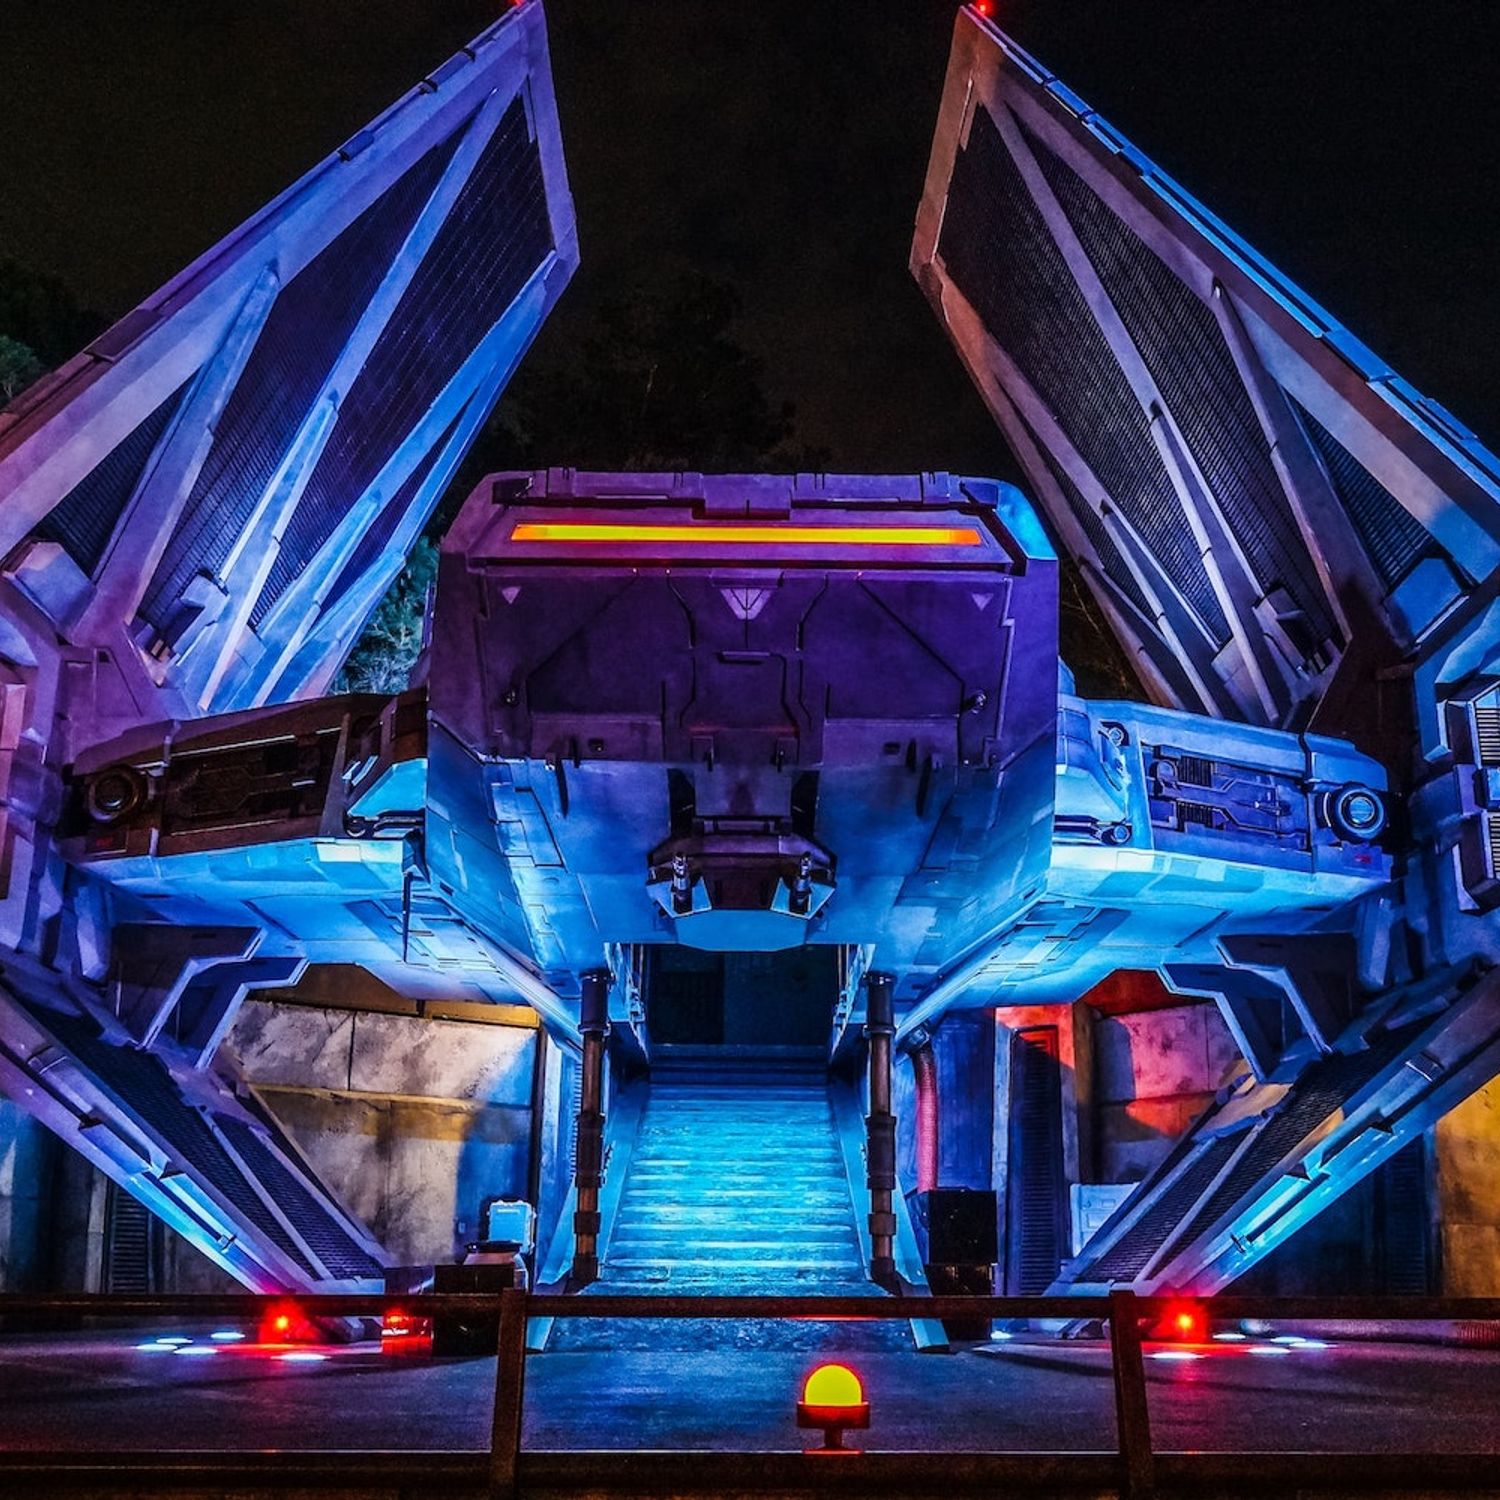 A tie fighter on a landing pad with glowing lights